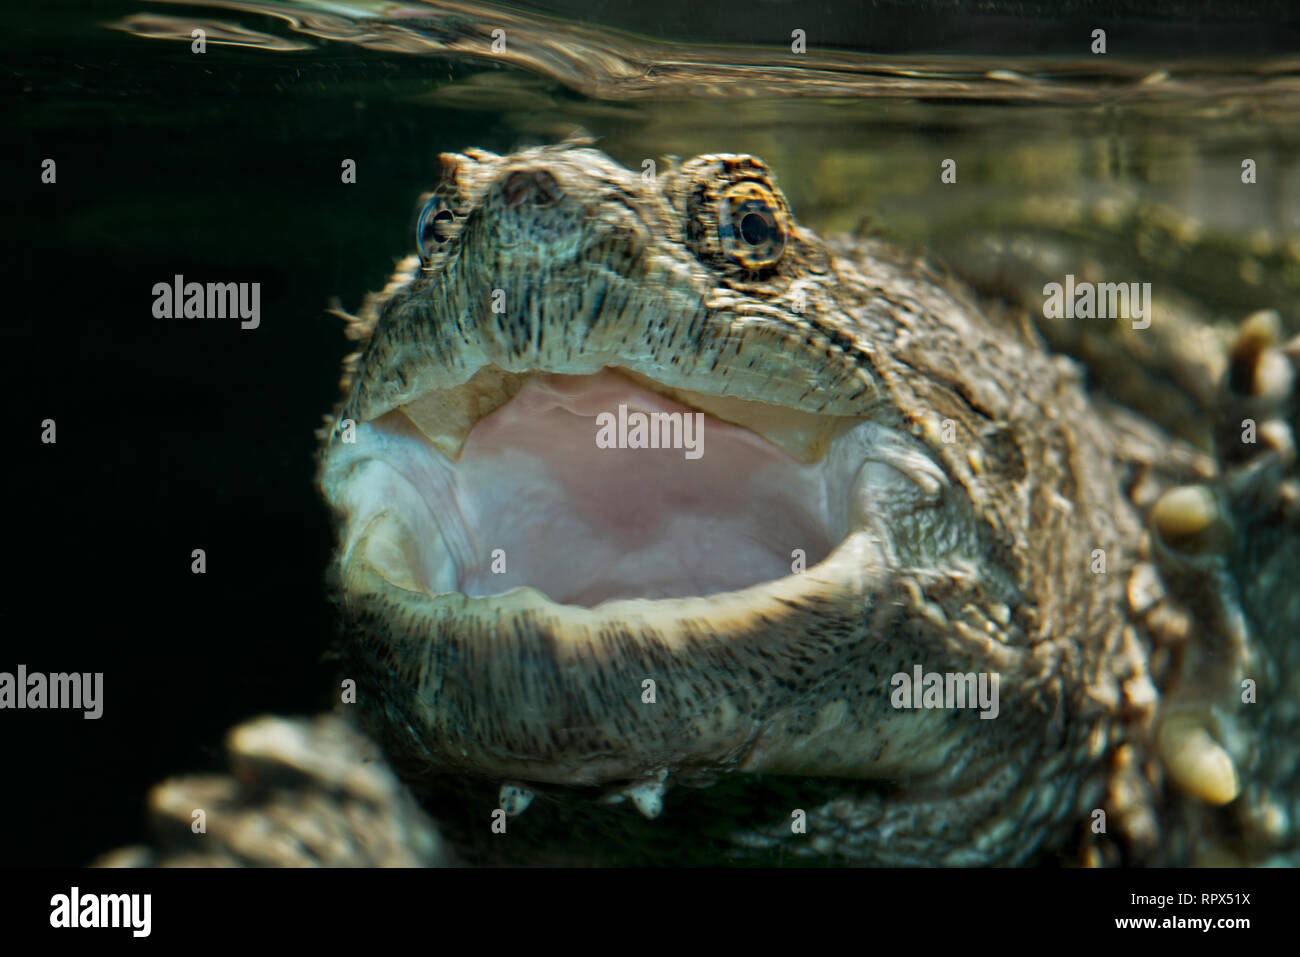 zoology / animals, reptile (reptilia), Common Snapping Turtle (Chelydra serpentina) beneath the water , Additional-Rights-Clearance-Info-Not-Available Stock Photo